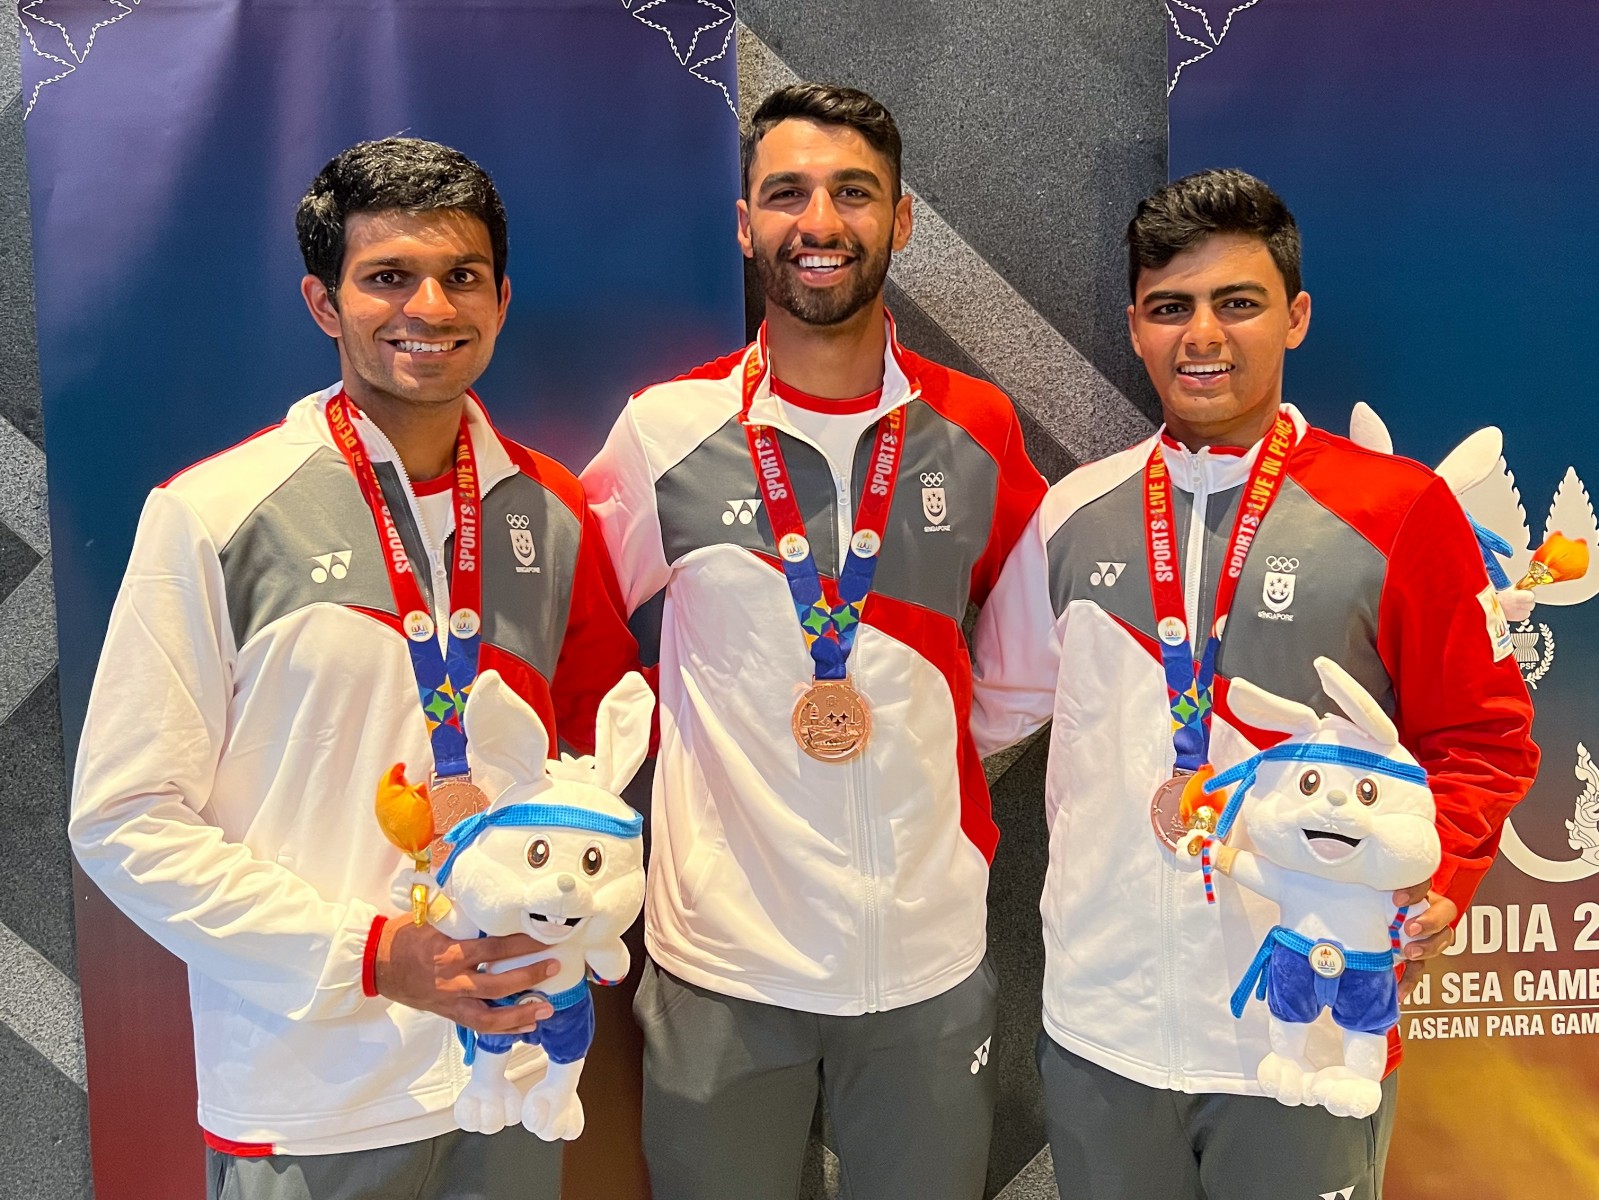 All smiles for TeamNUS cricket athletes (from left to right) Aahan Gopinath Achar, Avi Dixit and Aman Desai, as they took home medals in the men’s T20, T10 and Sixes.
